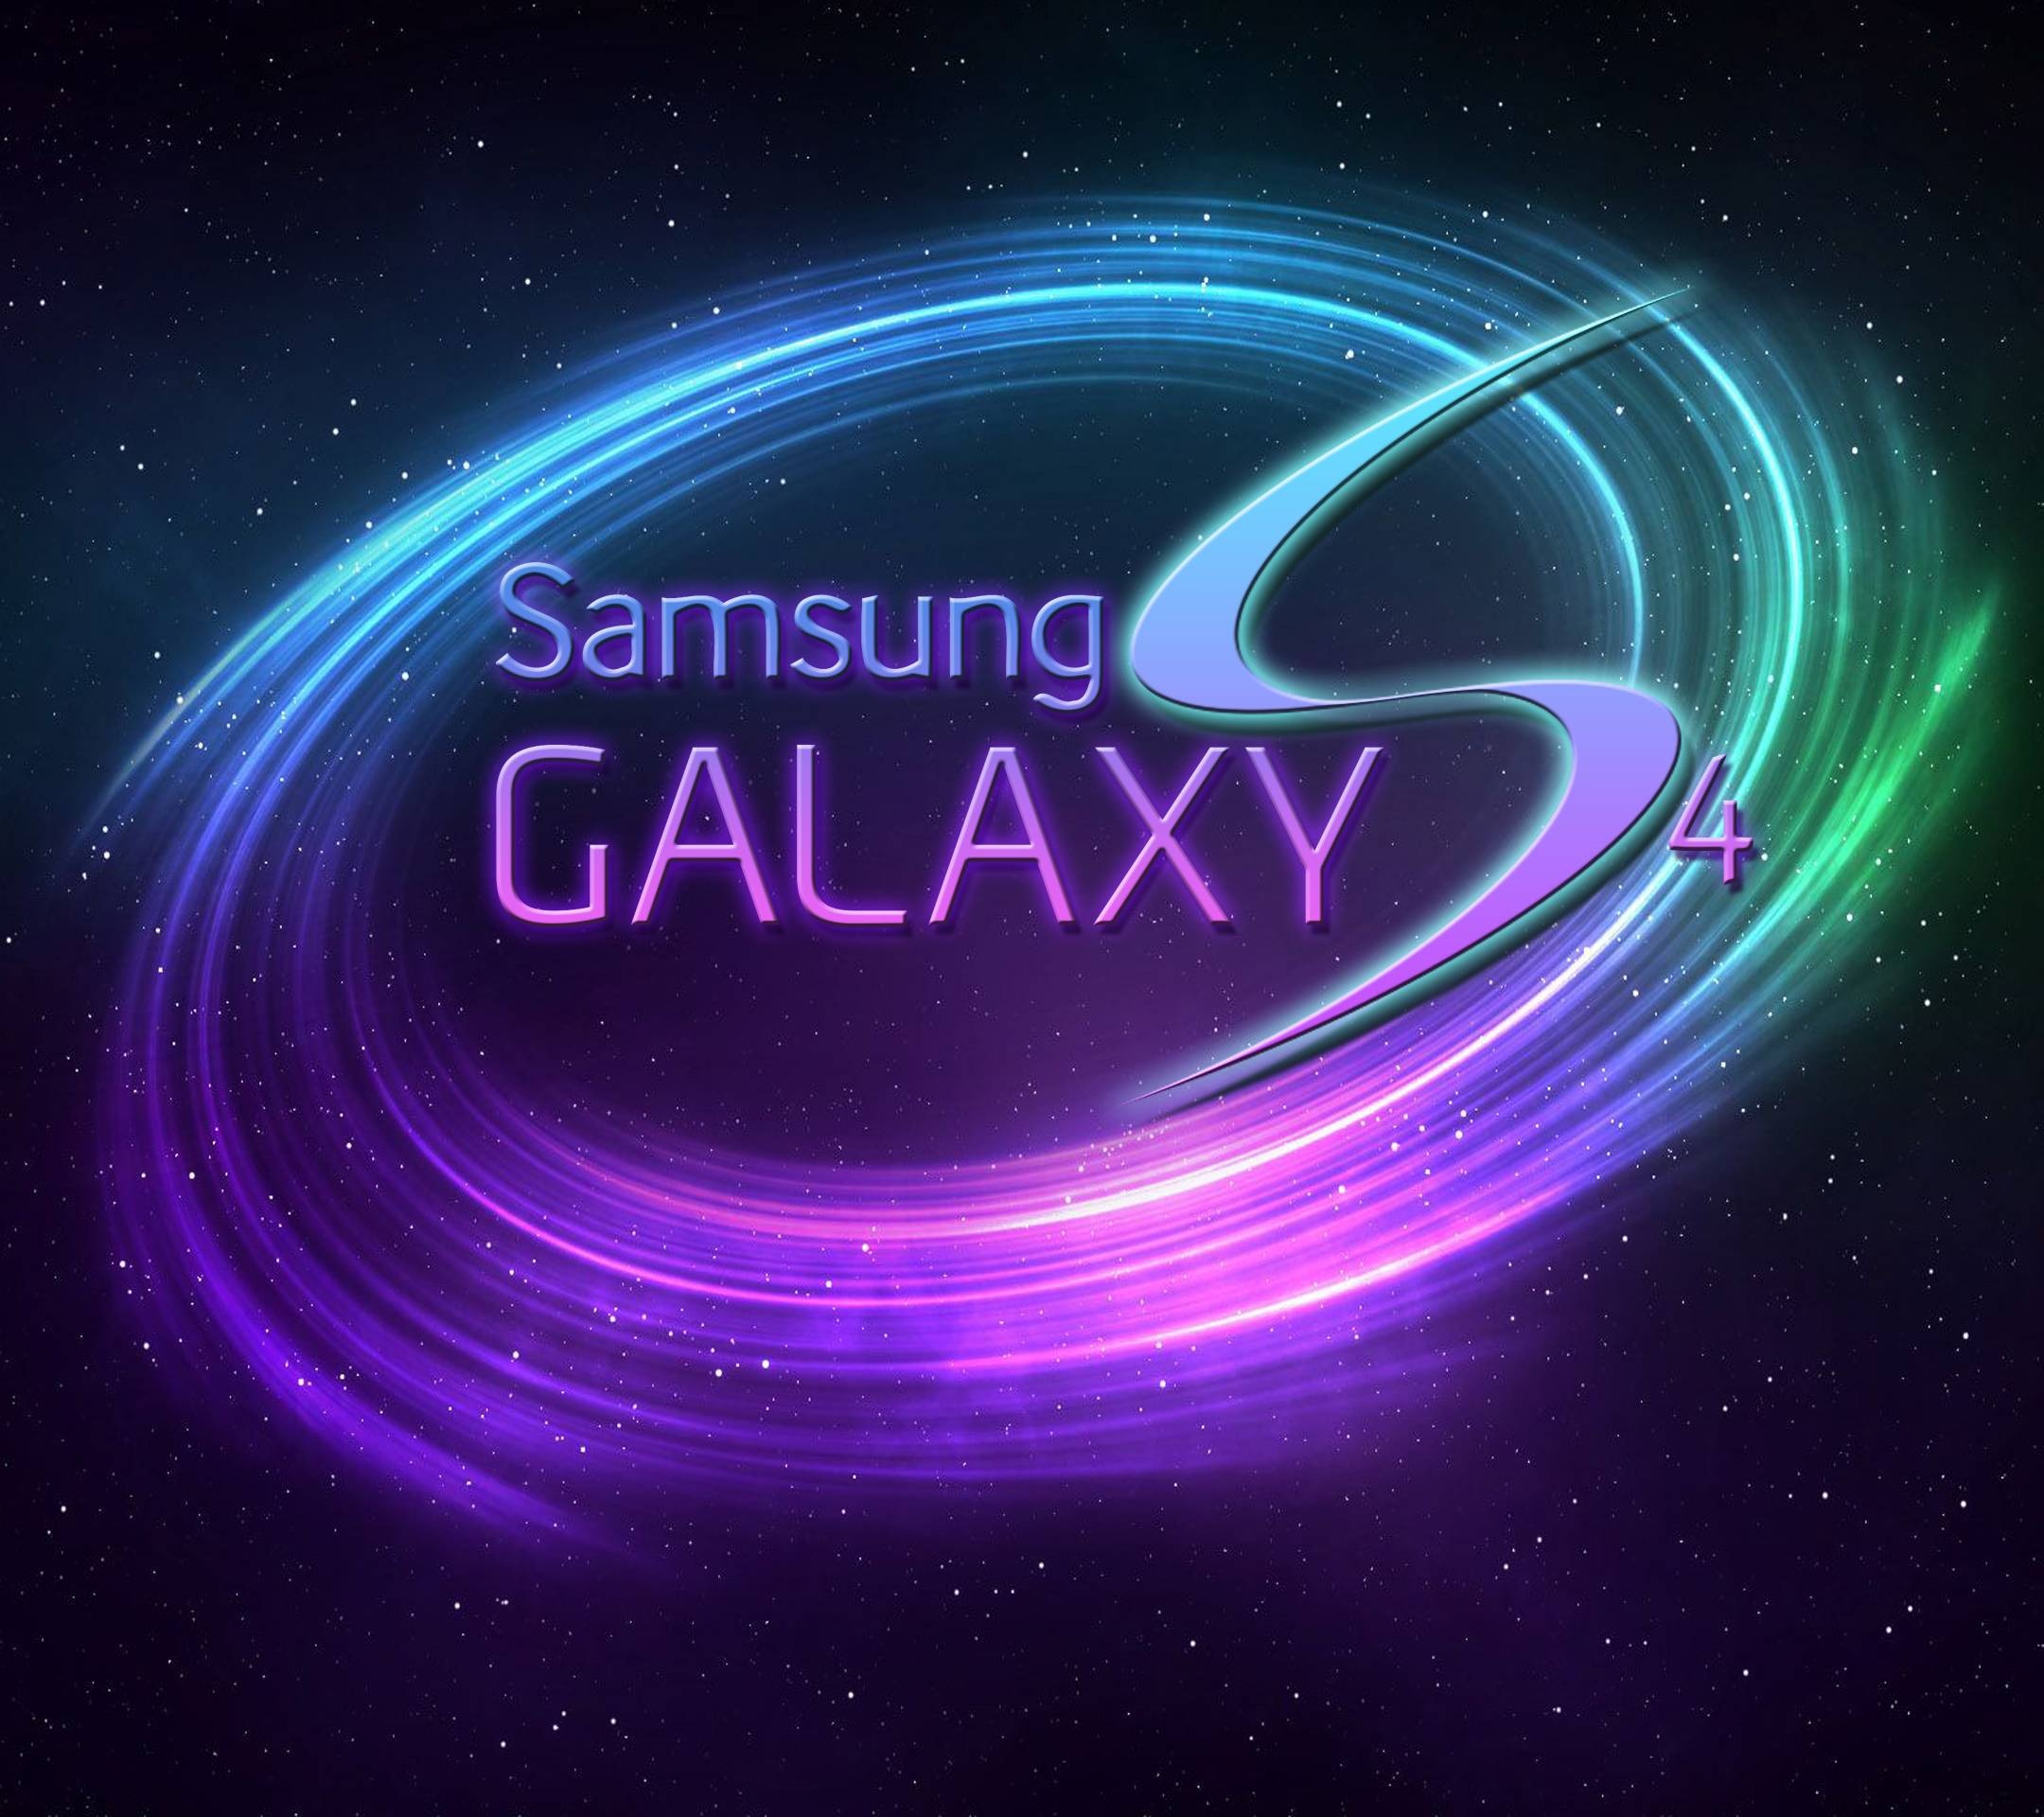 Samsung: Galaxy, Different phone ranges, A, Z, Note, S series. 2160x1920 HD Wallpaper.